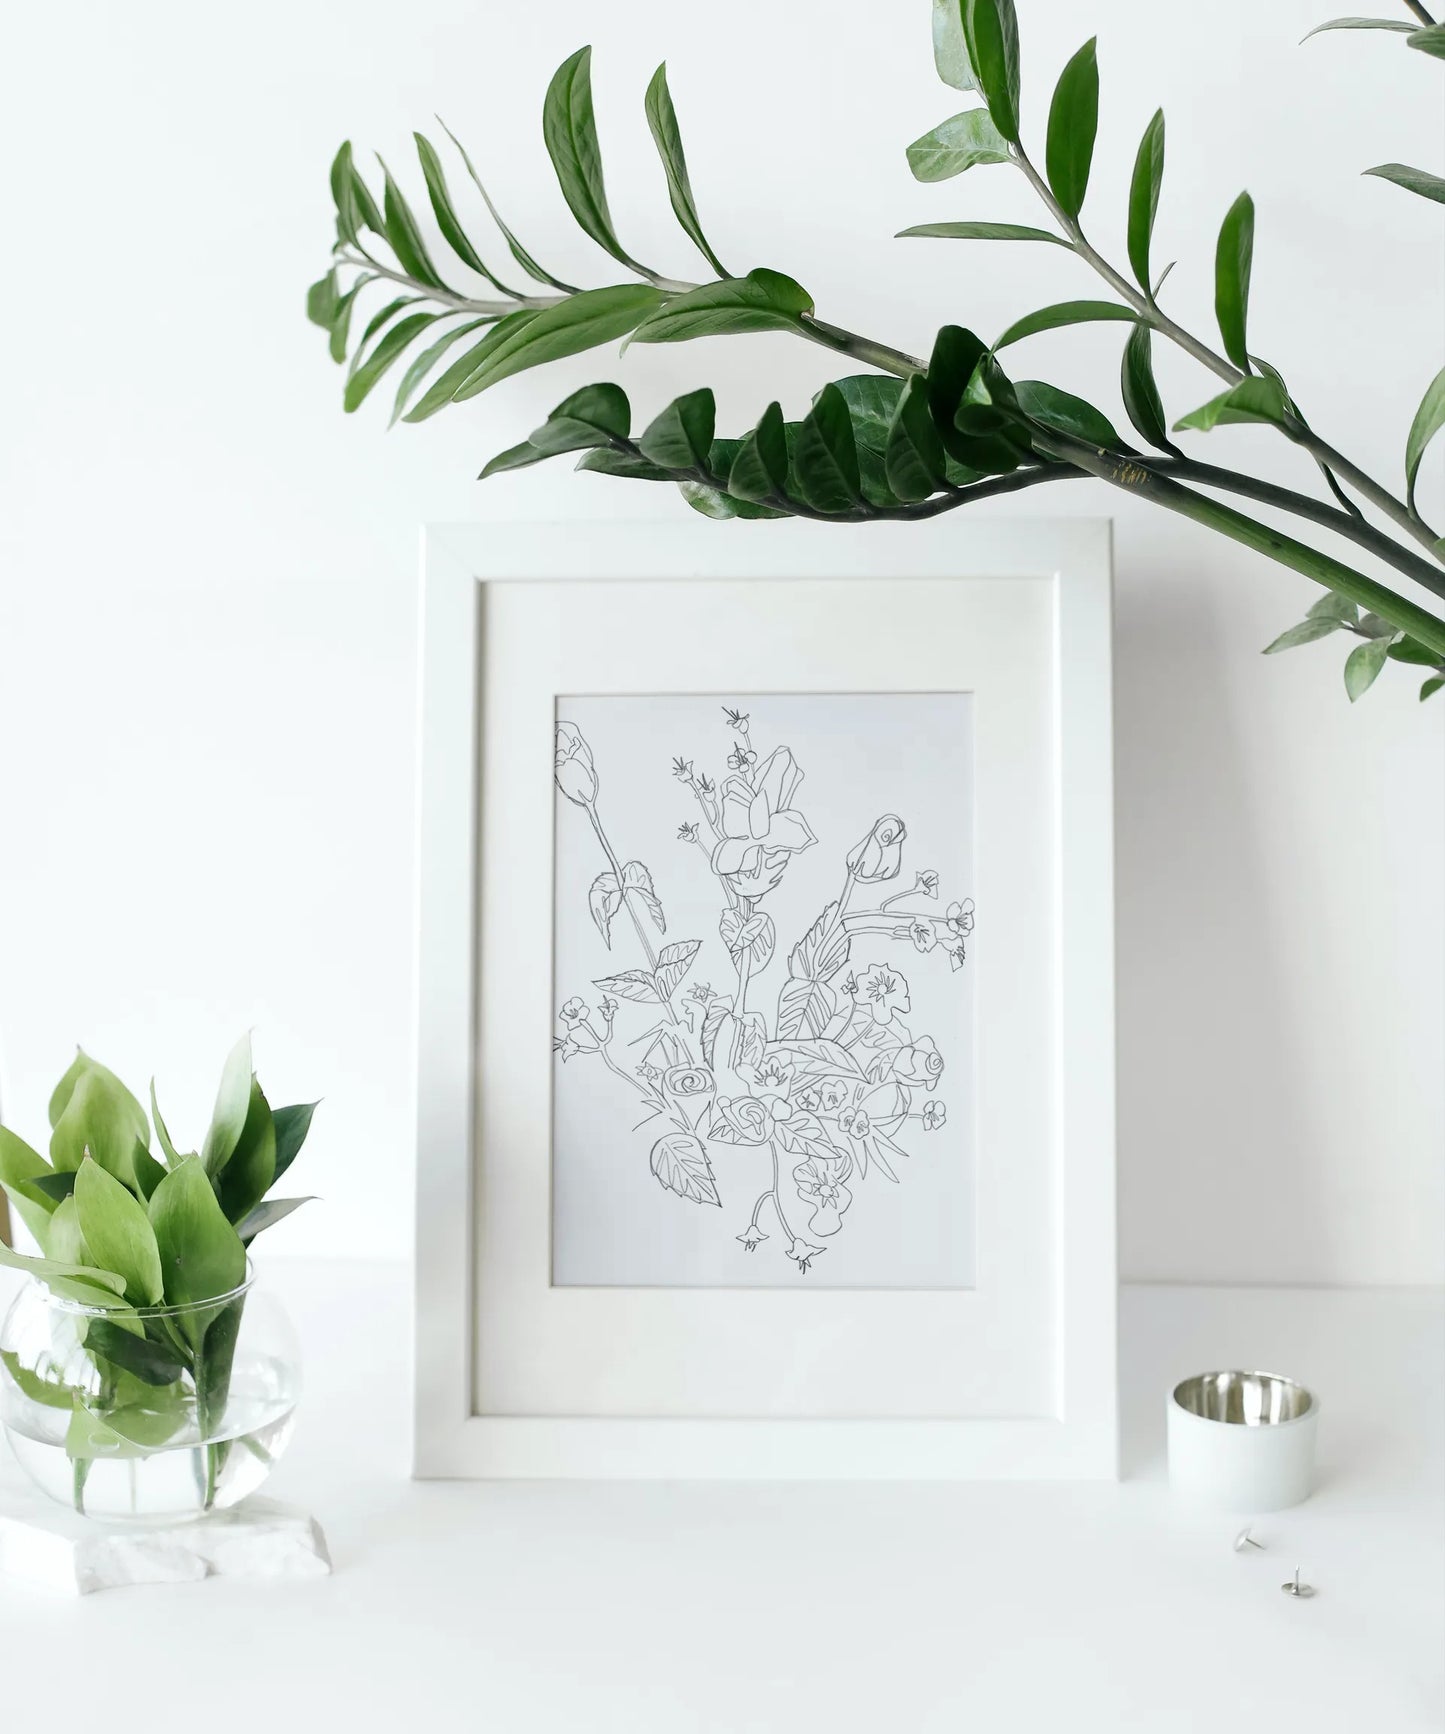 The Floral Drawings | "Bouquet" Print